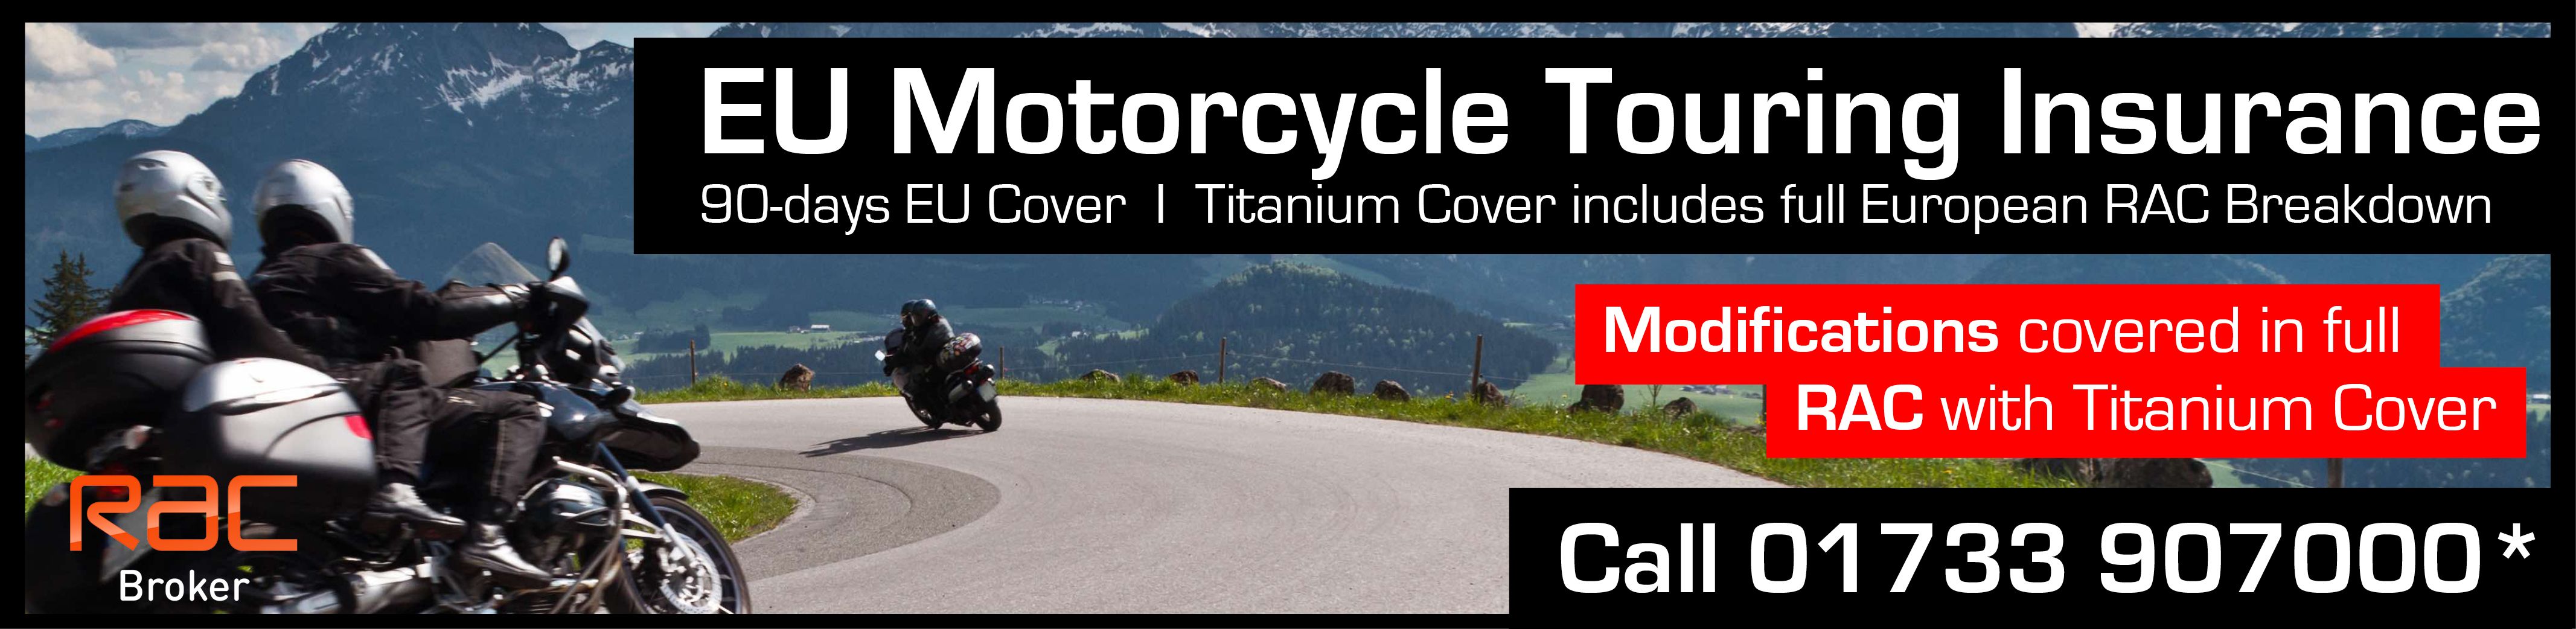 Motorcycle Touring Travel Insurance